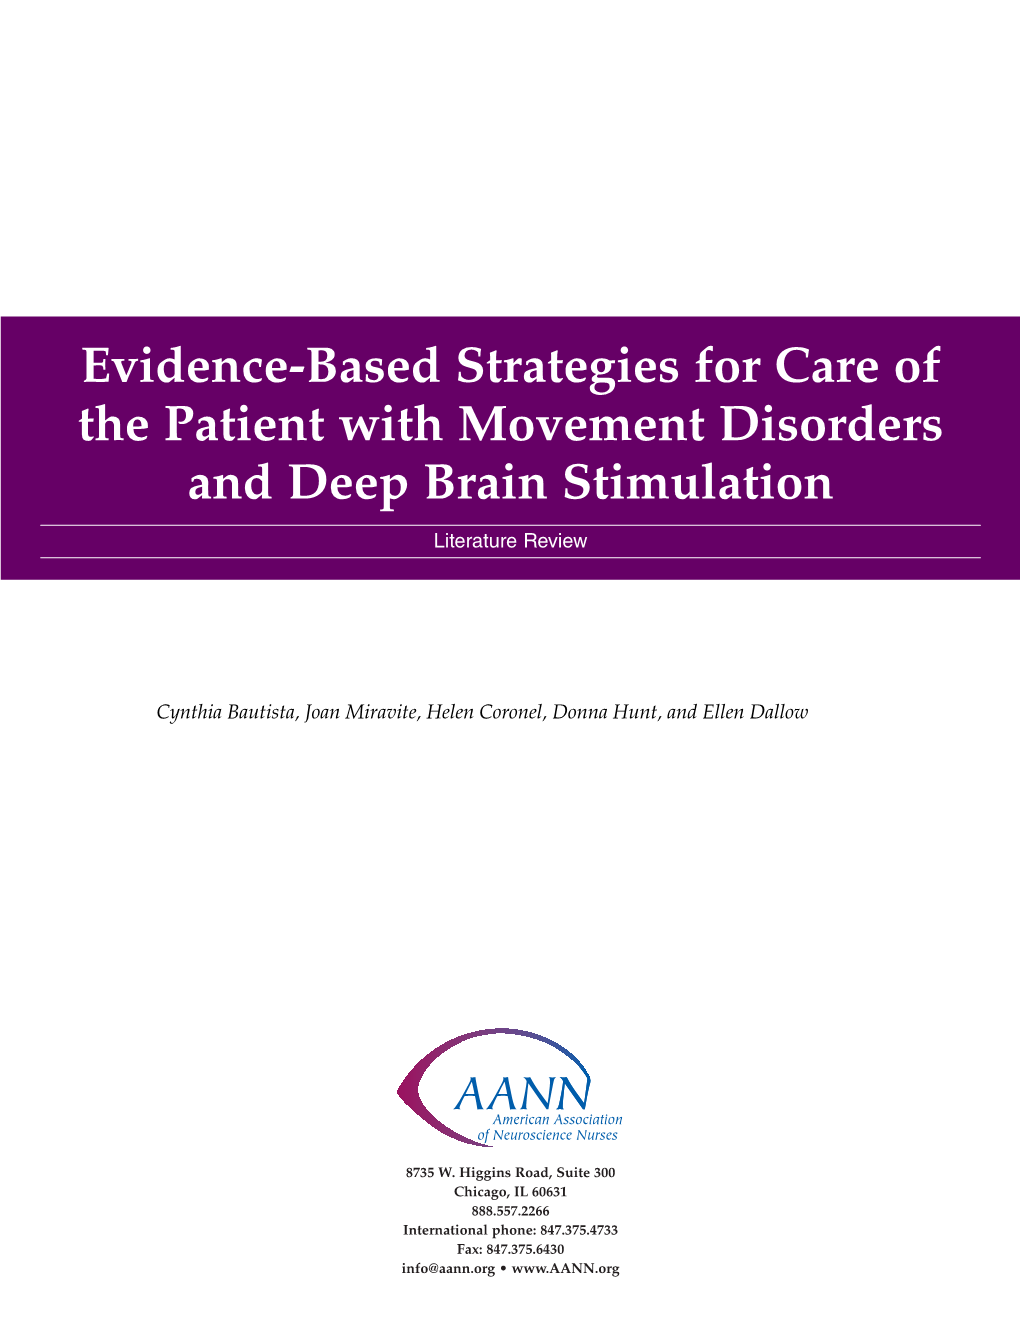 Evidence-Based Strategies for Care of the Patient with Movement Disorders and Deep Brain Stimulation